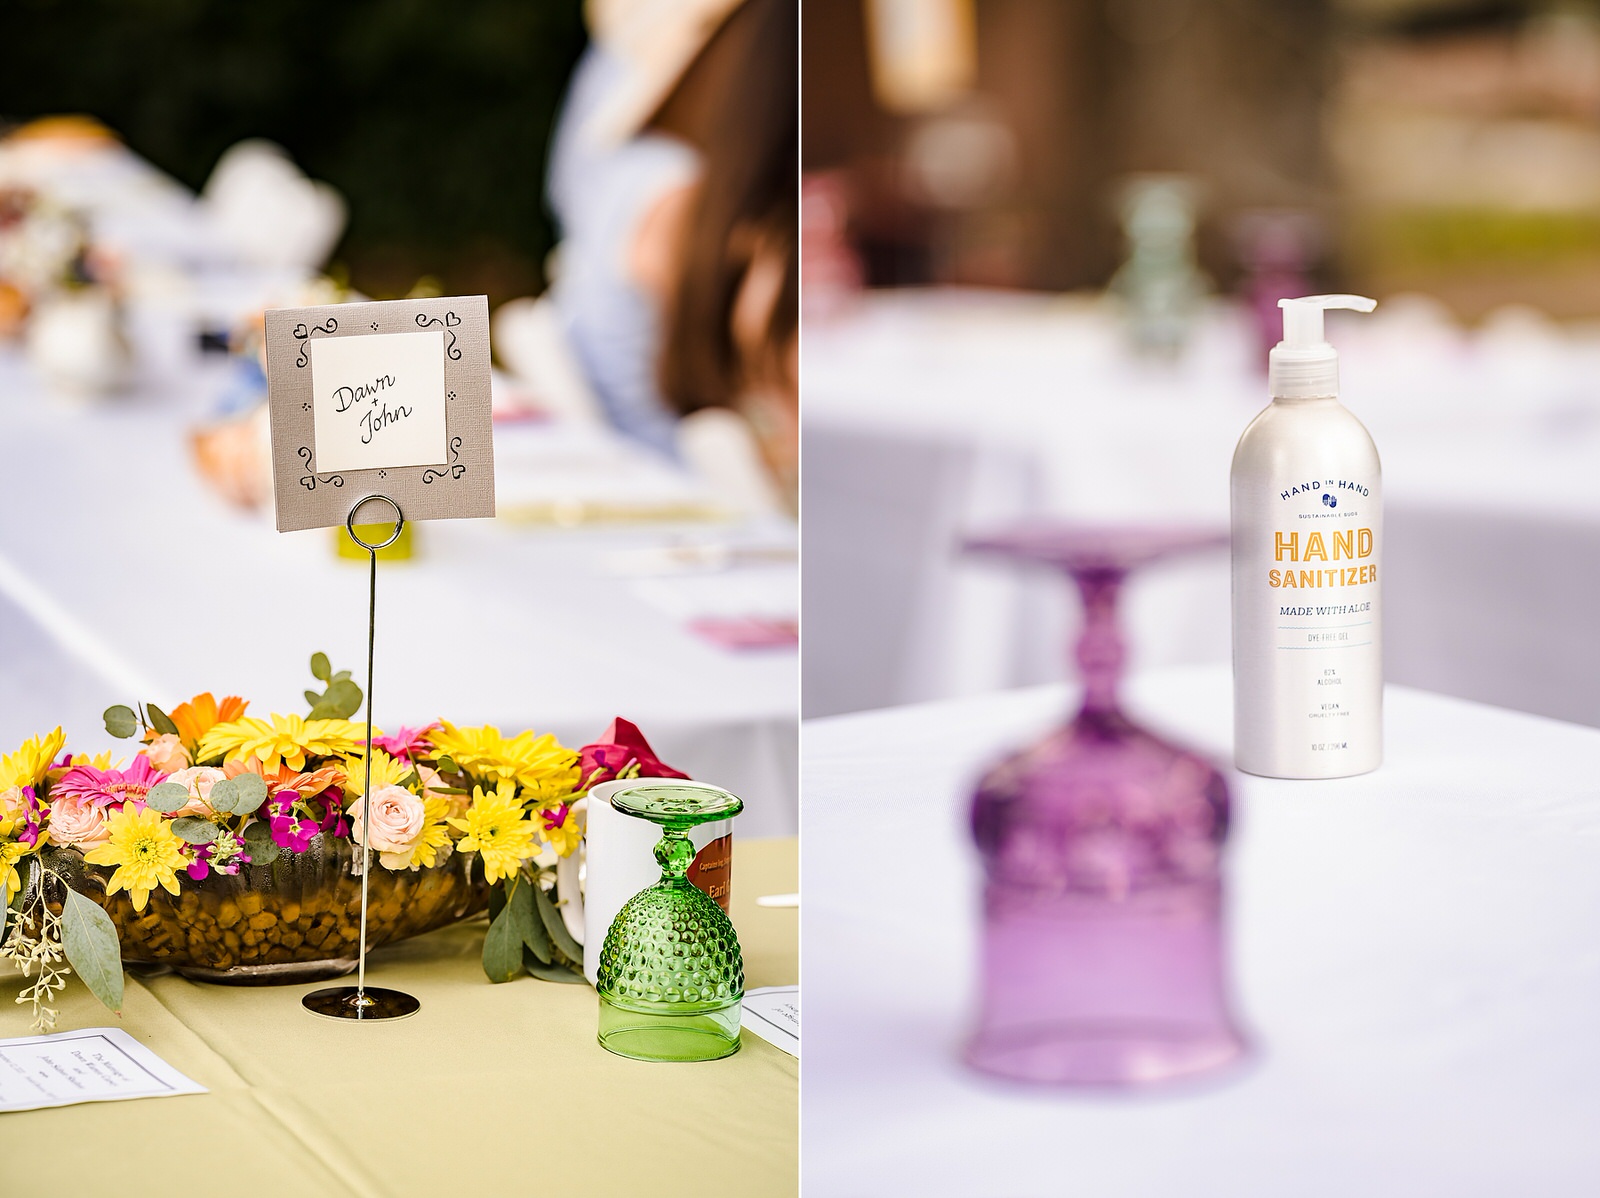 Wedding reception table set with vintage glassware and colorful signage